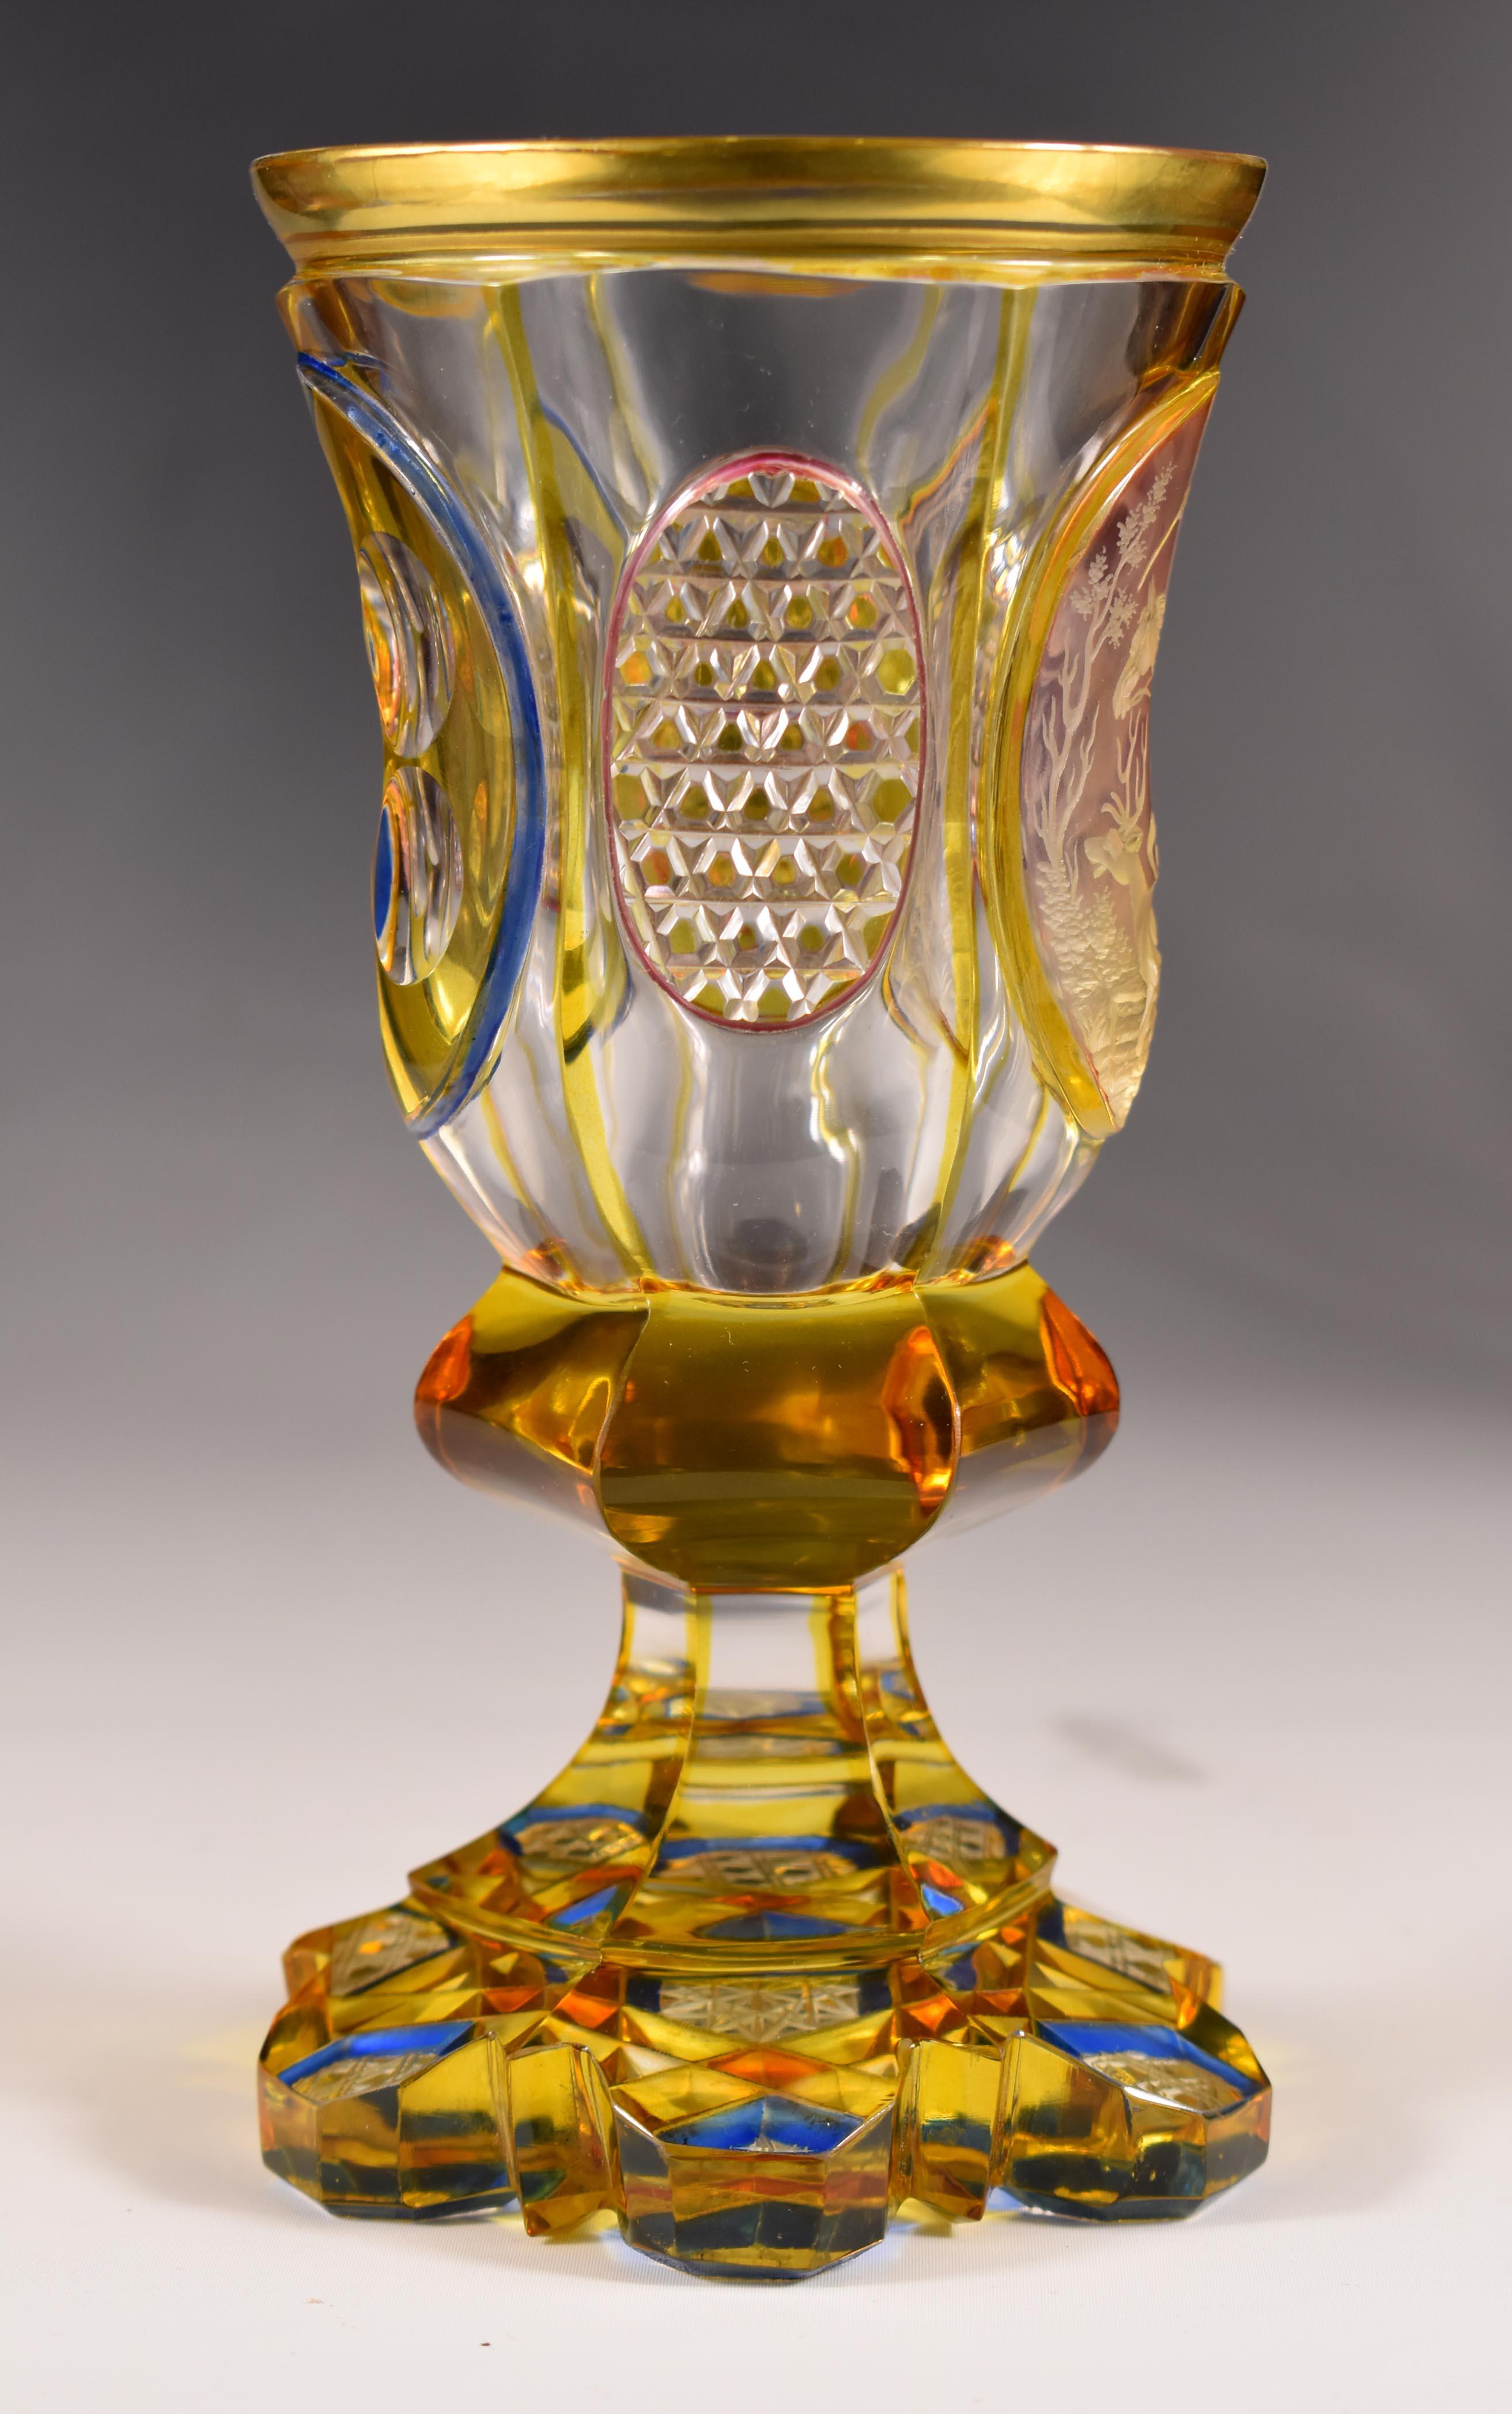 Antique Engraved Goblet Hunting motif 19-20 century Bohemian Glass In Good Condition For Sale In Nový Bor, CZ